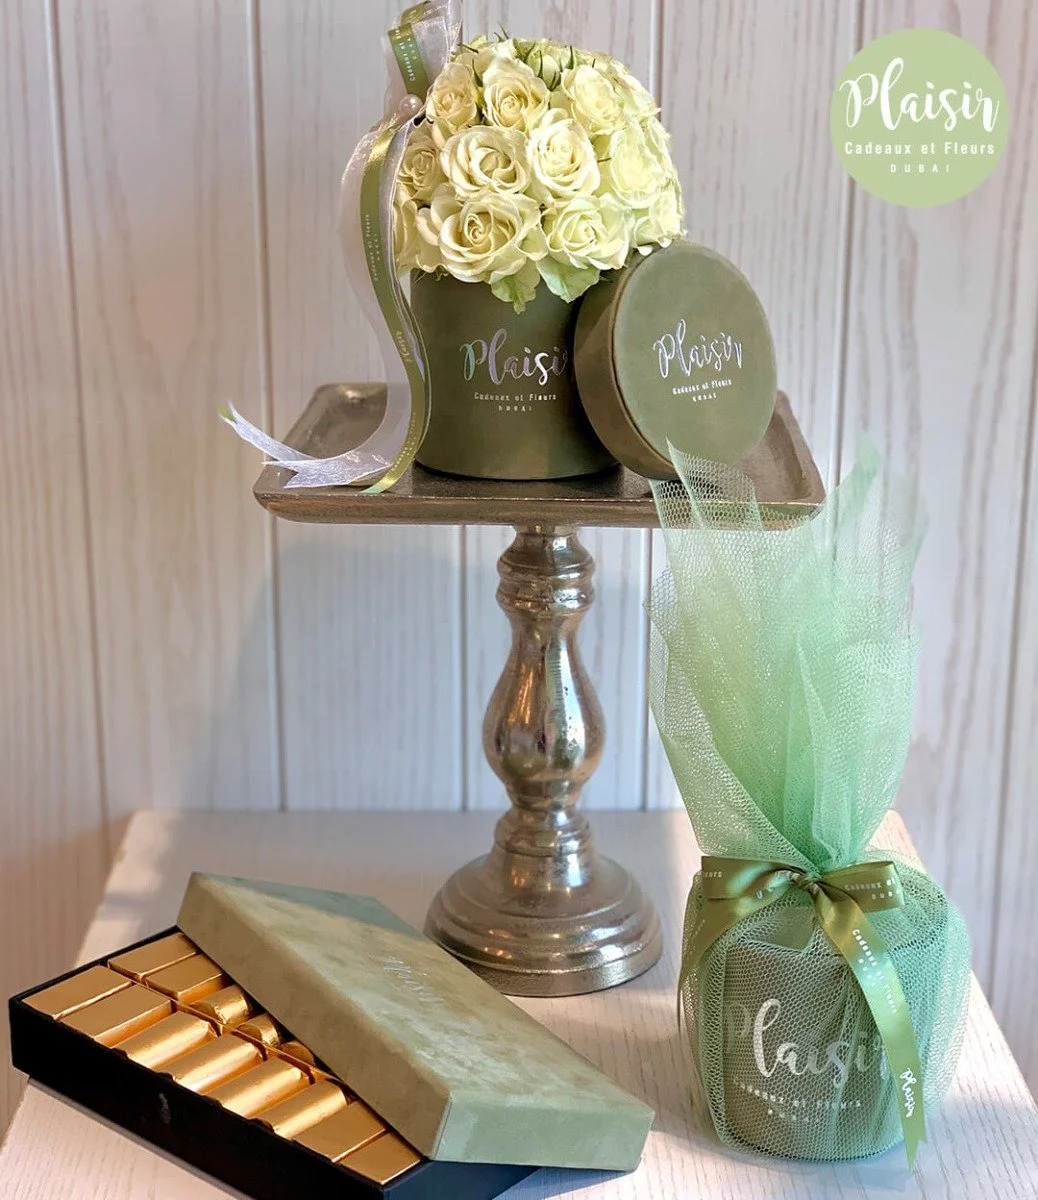 Green Mini Rose Dome With Chocolates & Candle By Plaisir